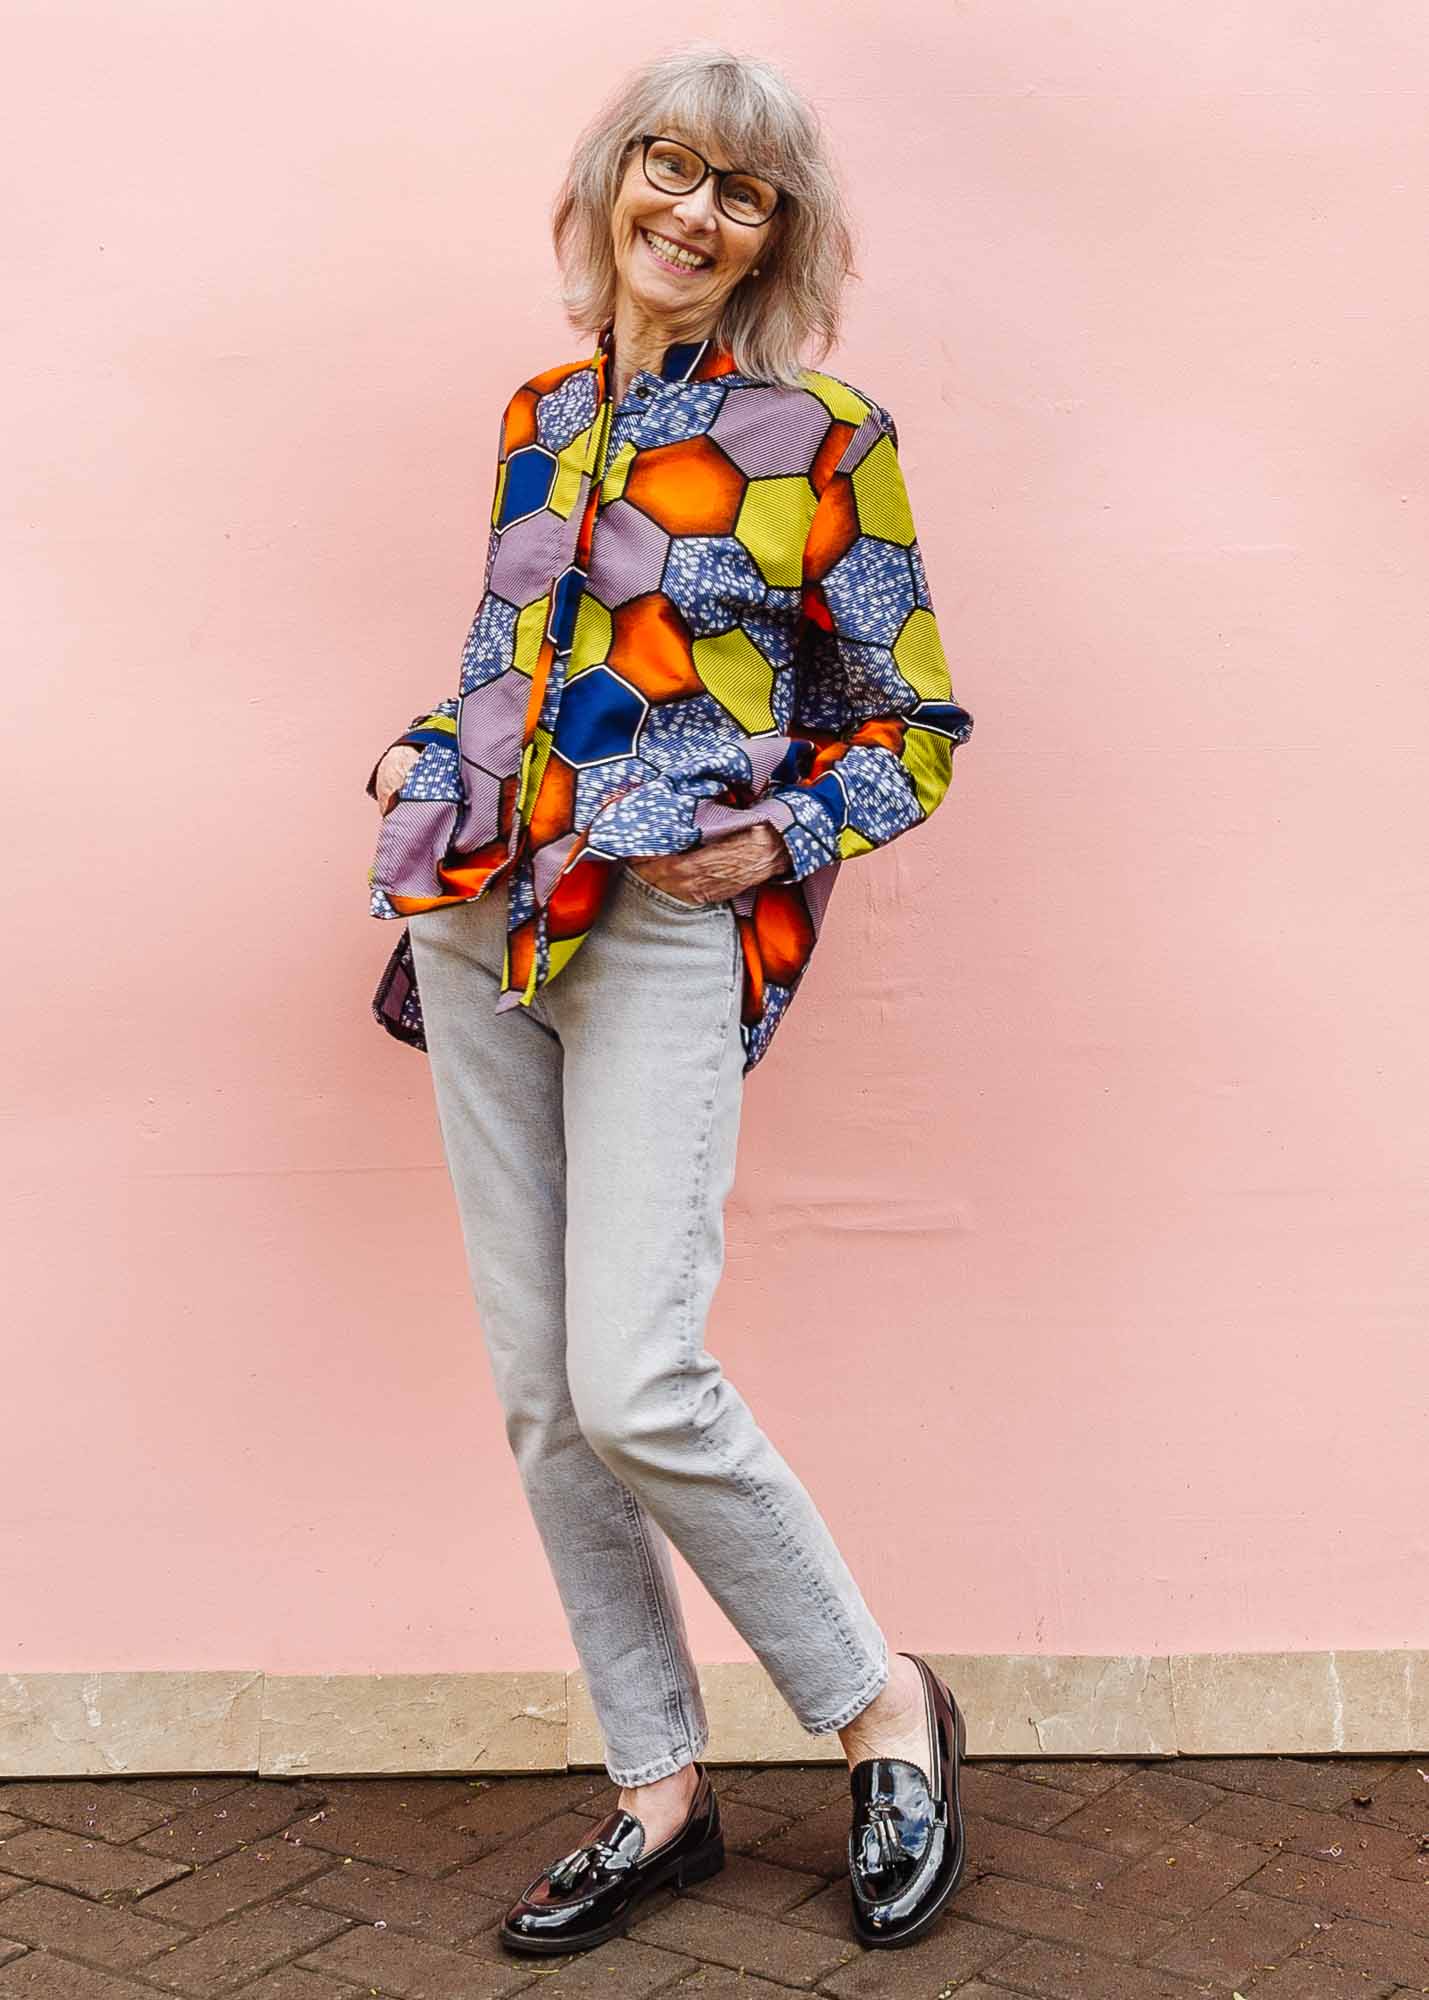 The model is wearing multicolored long sleeved shirt with geometric print 